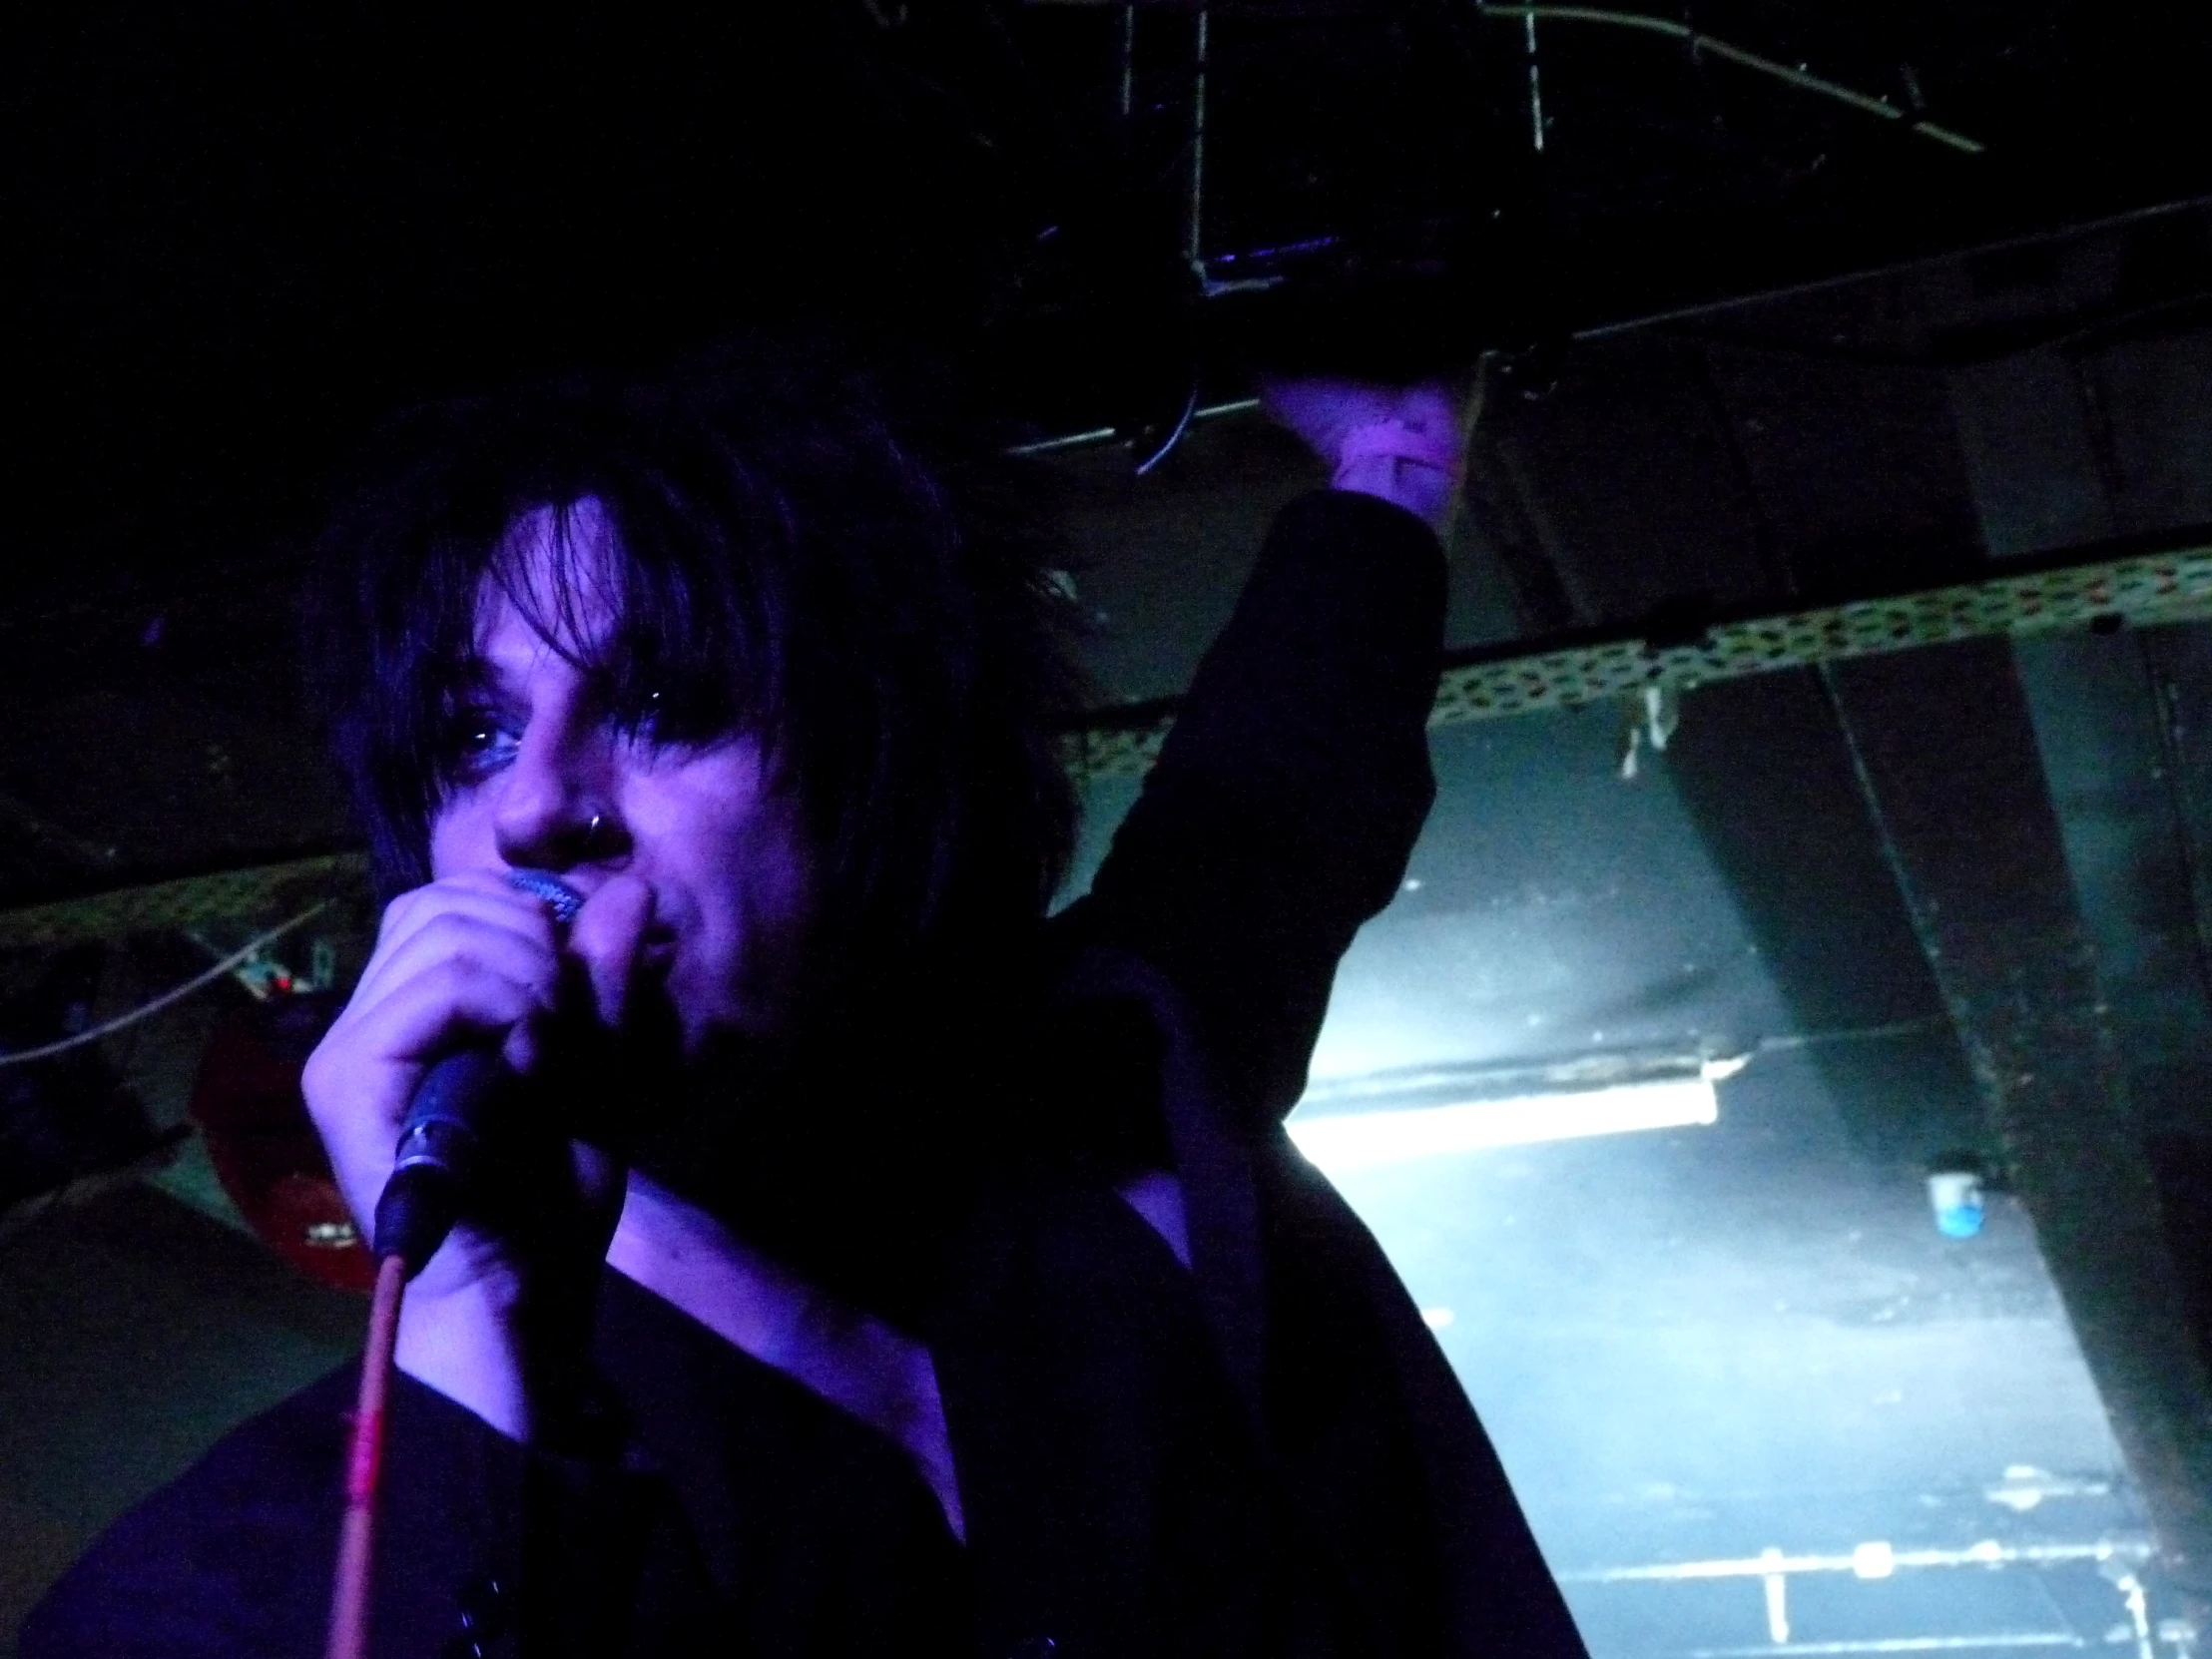 the man with microphone is singing in front of a dark background